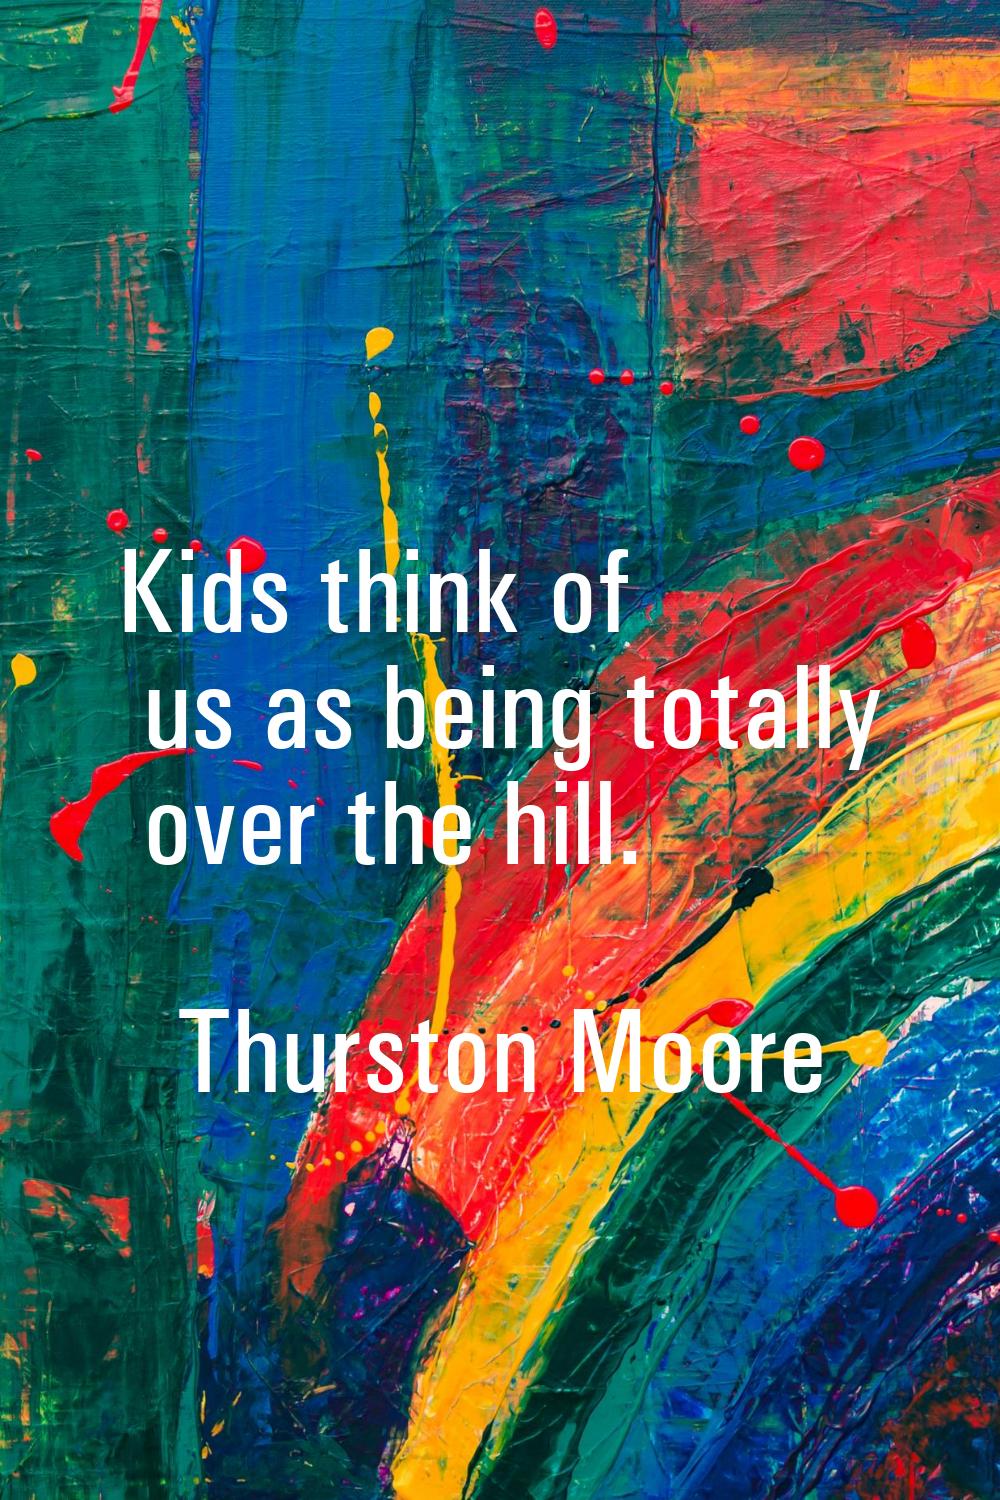 Kids think of us as being totally over the hill.